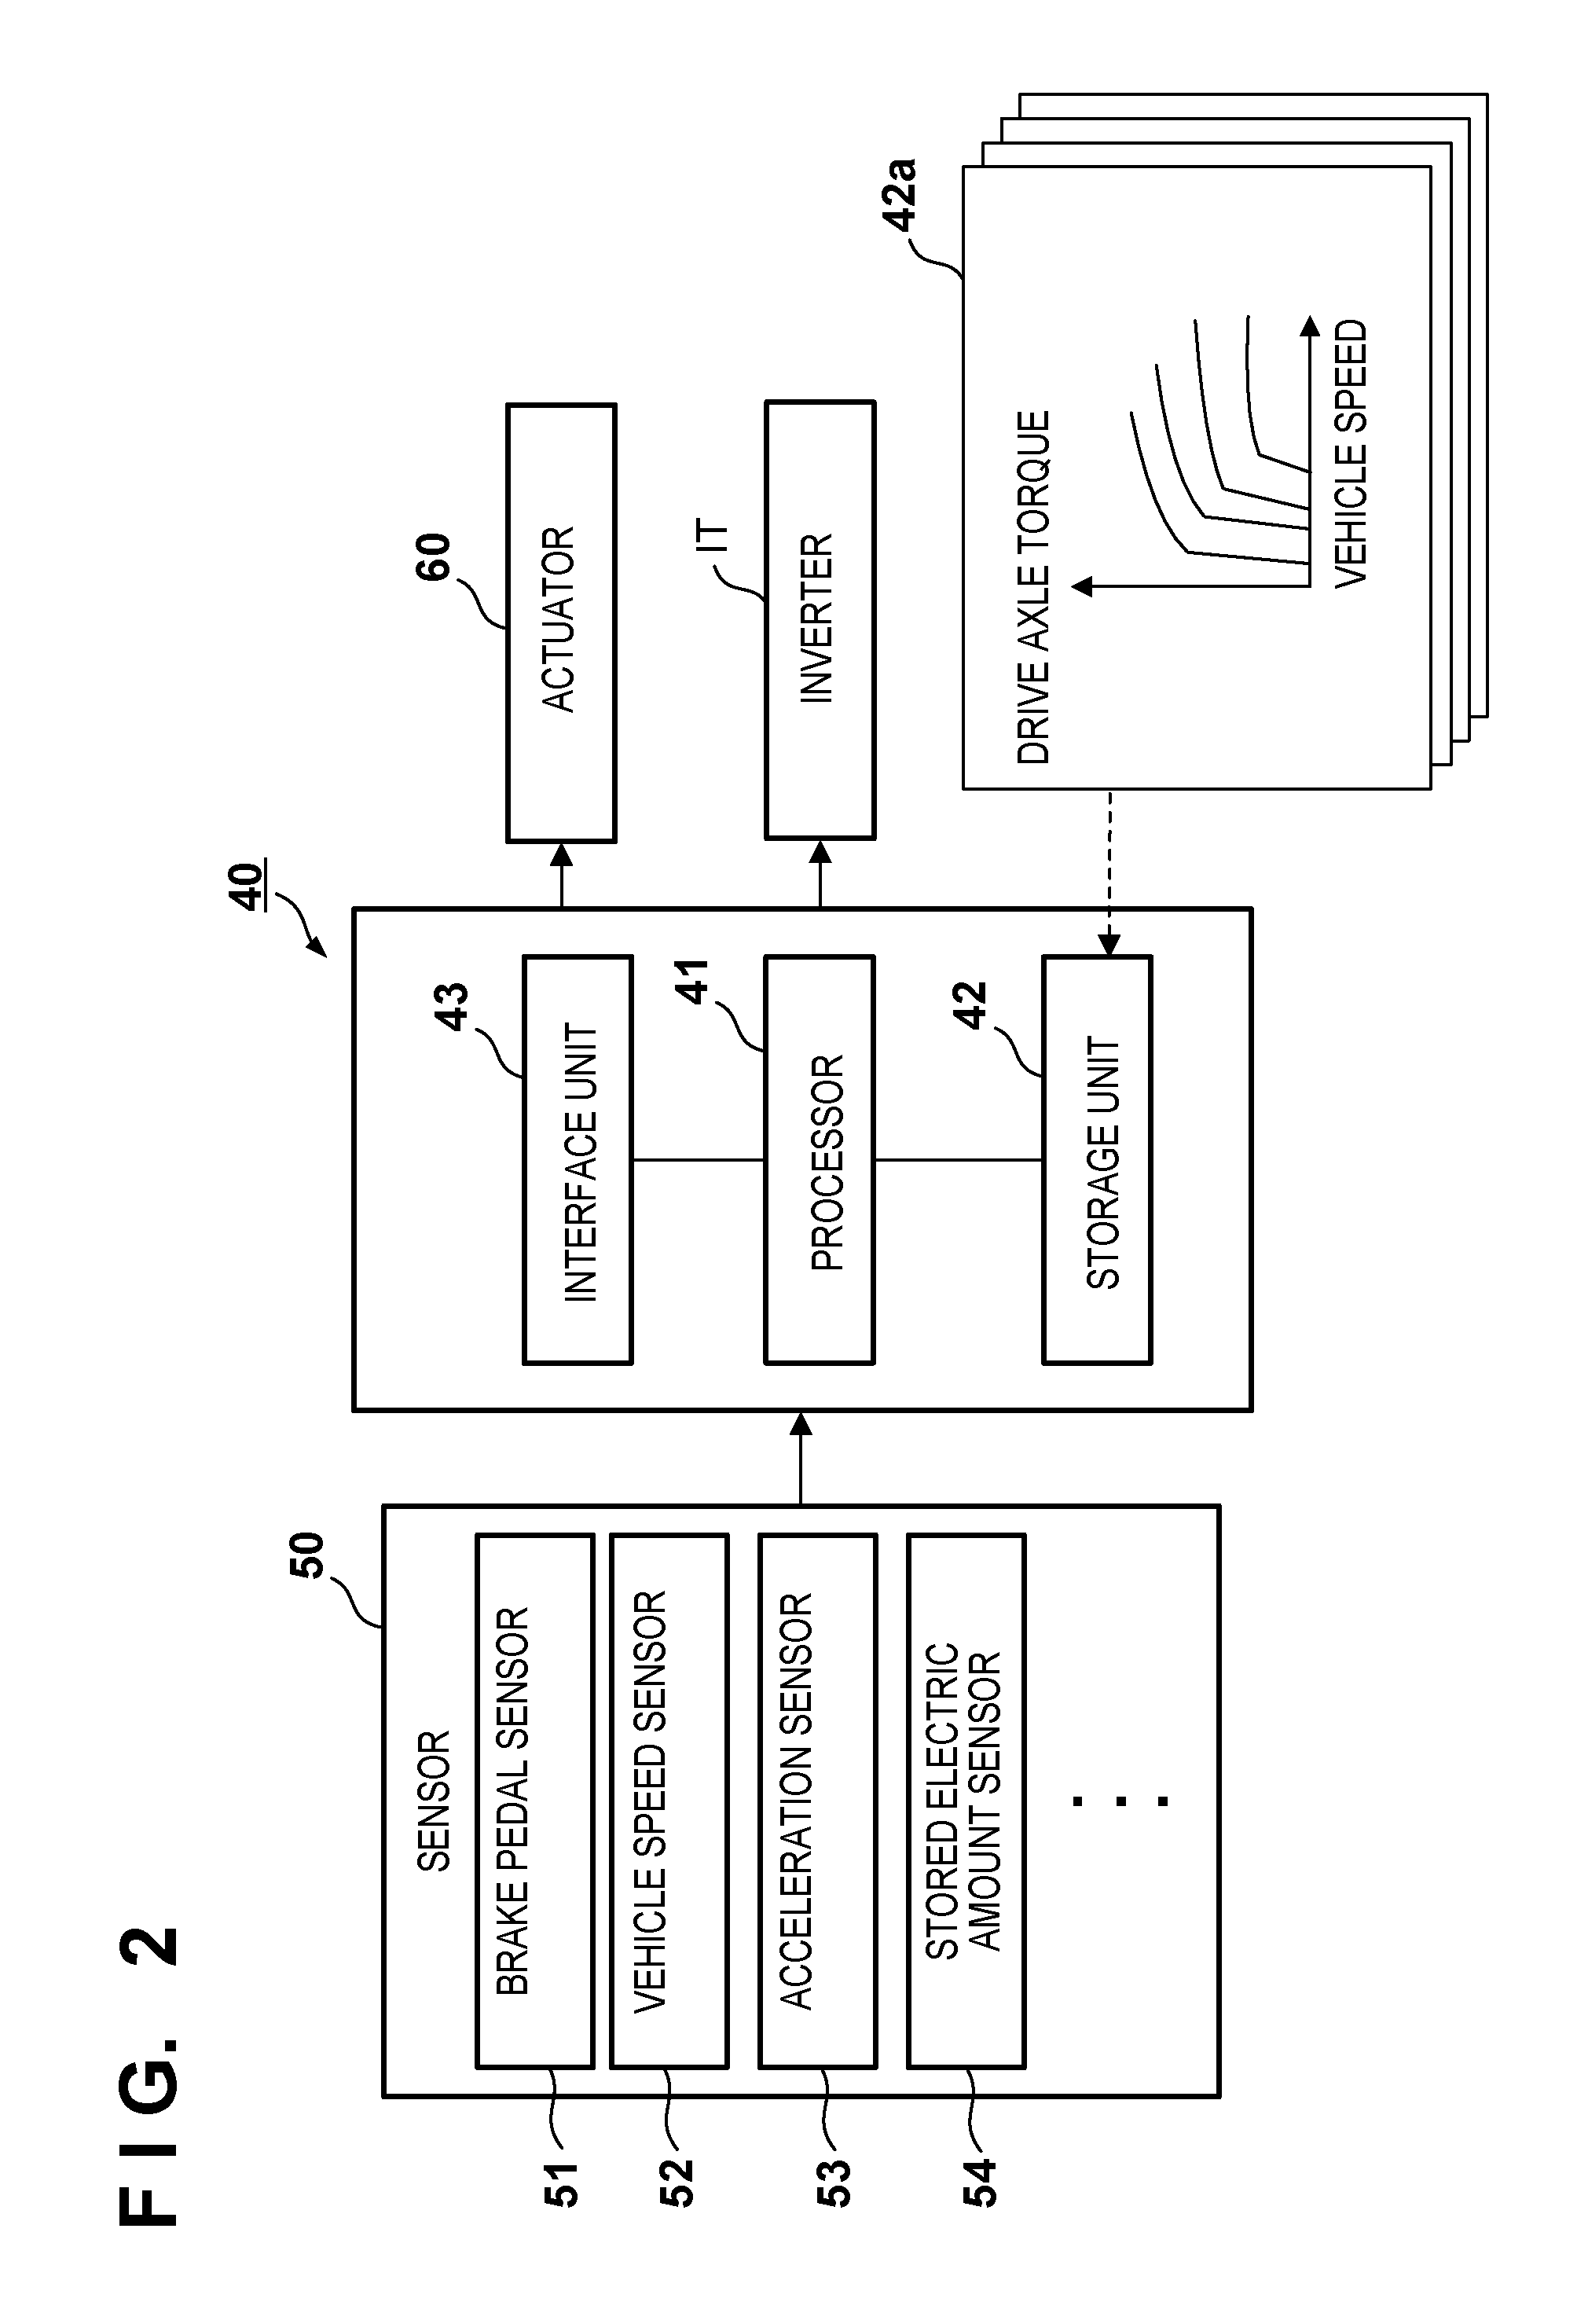 Transmission control for a hybrid electric vehicle with regenerative braking